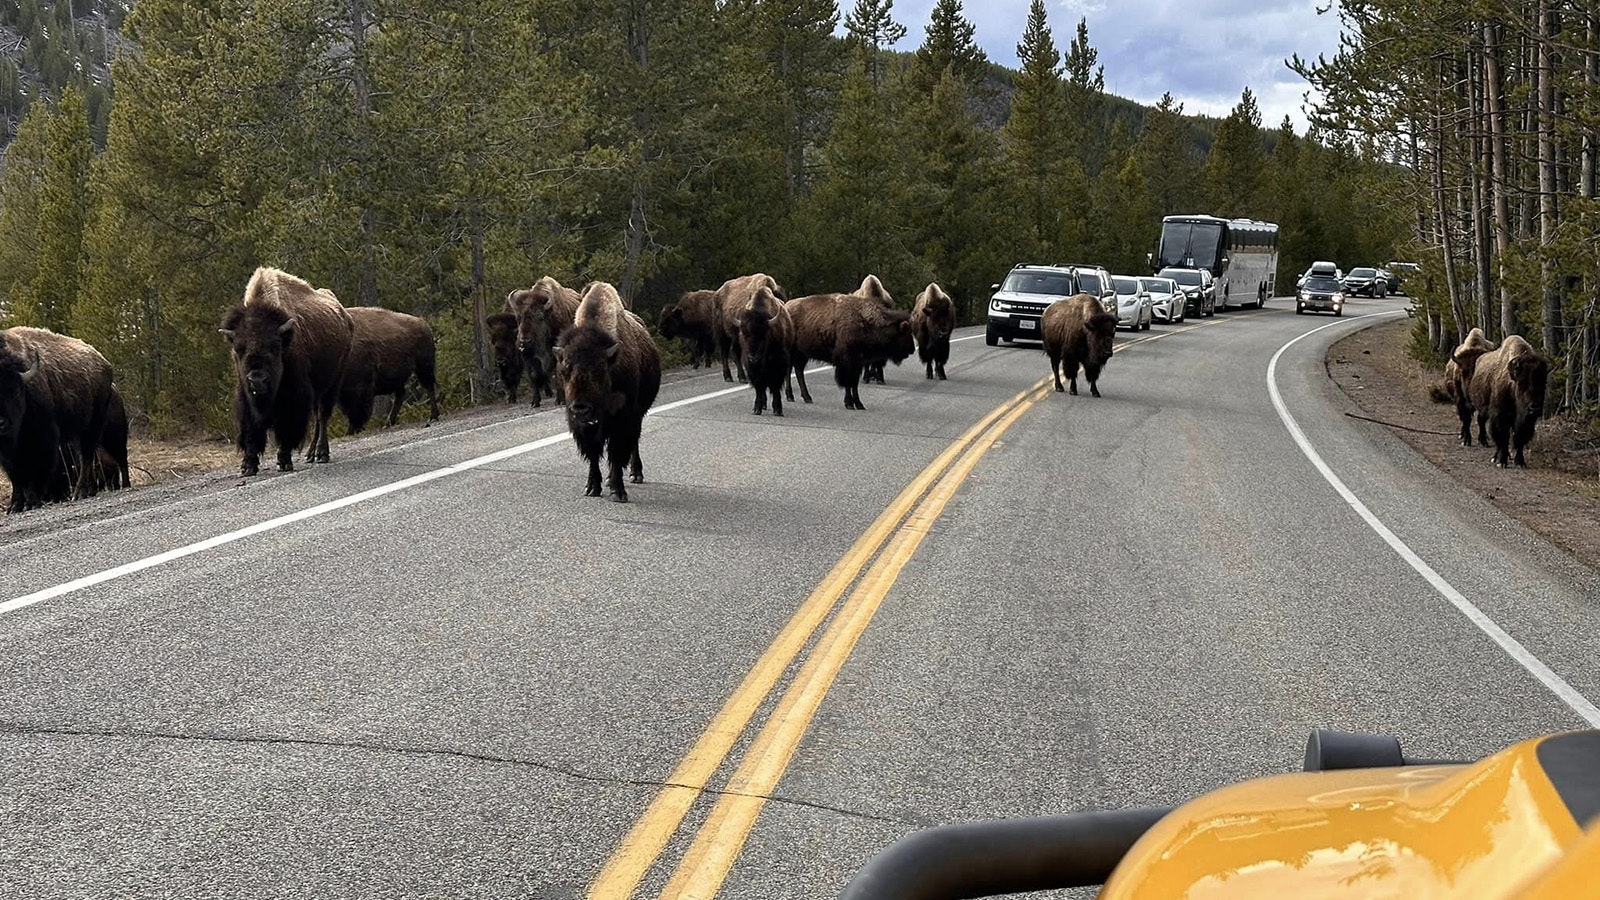 Debate rages over tour bus driving through bison jam in Yellowstone